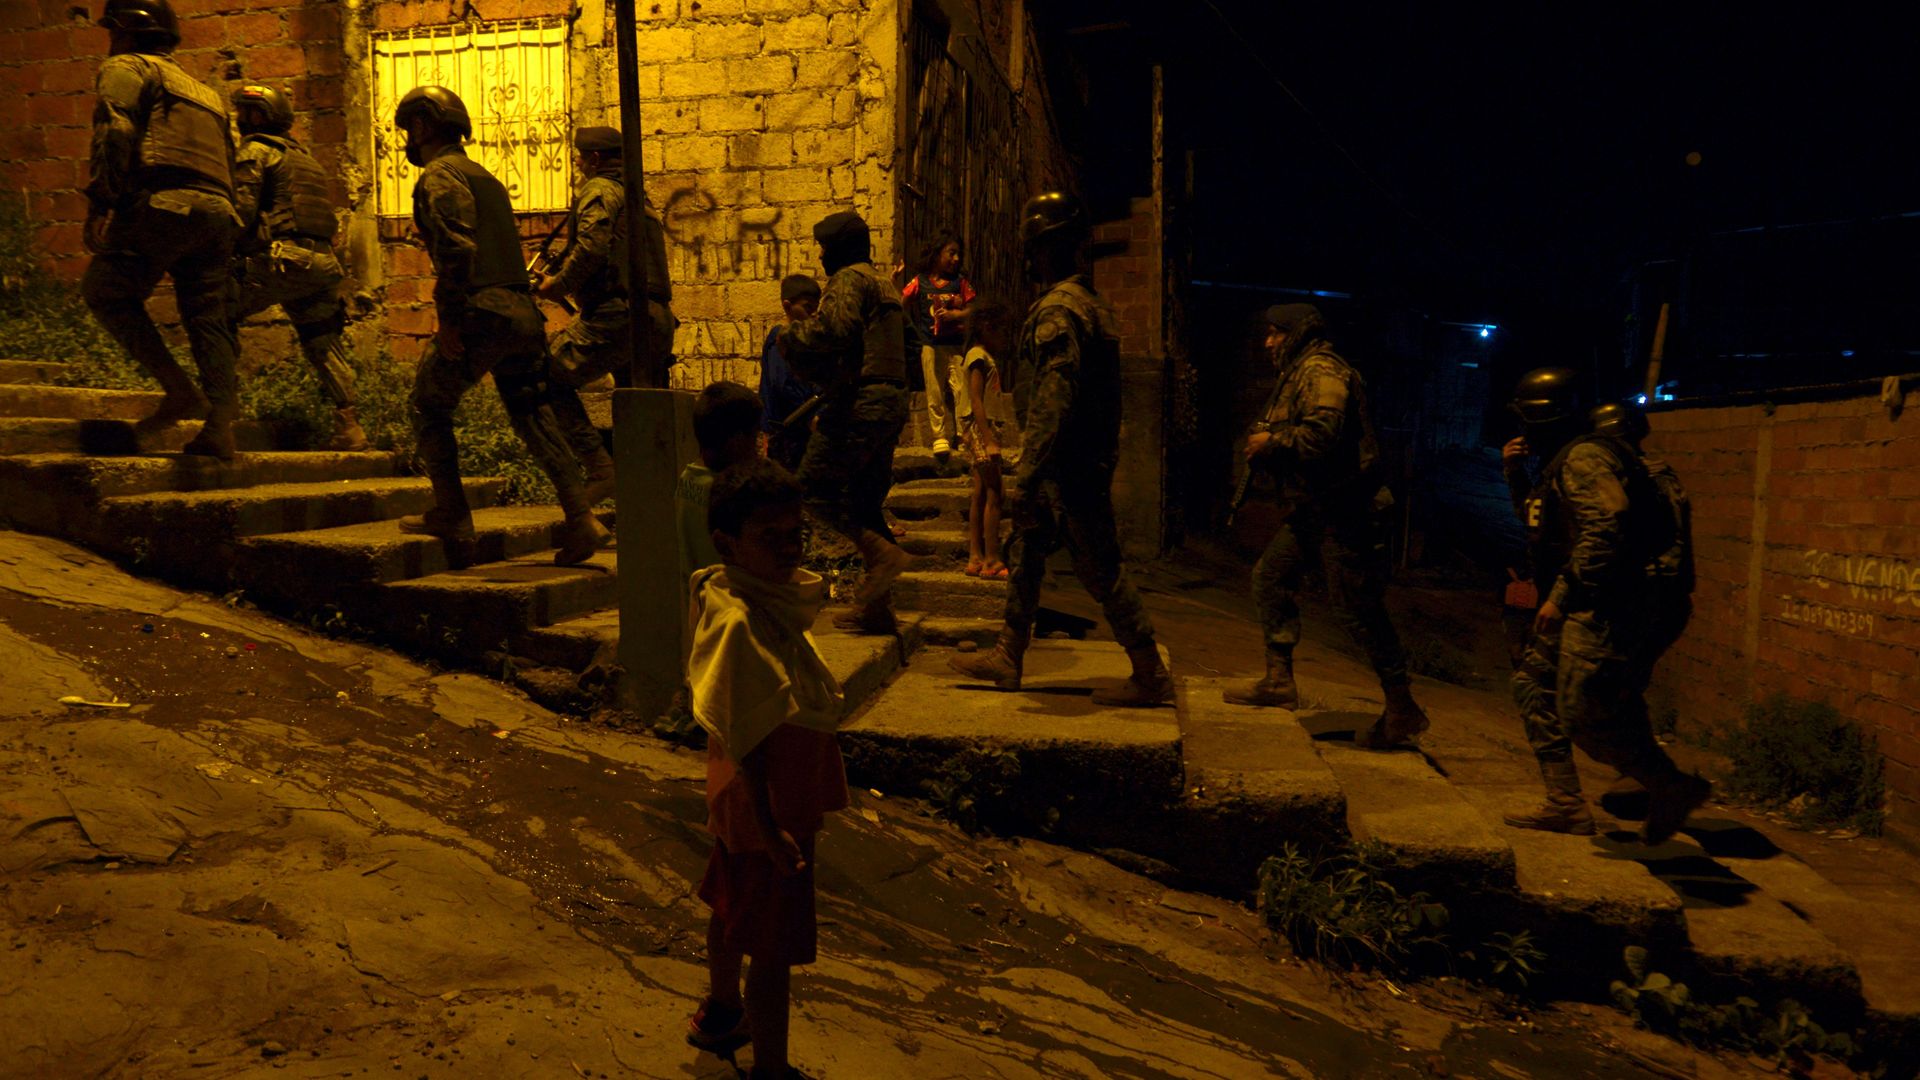 Soldiers walking up some steps while in line patrol in Peru as a child stands on the street